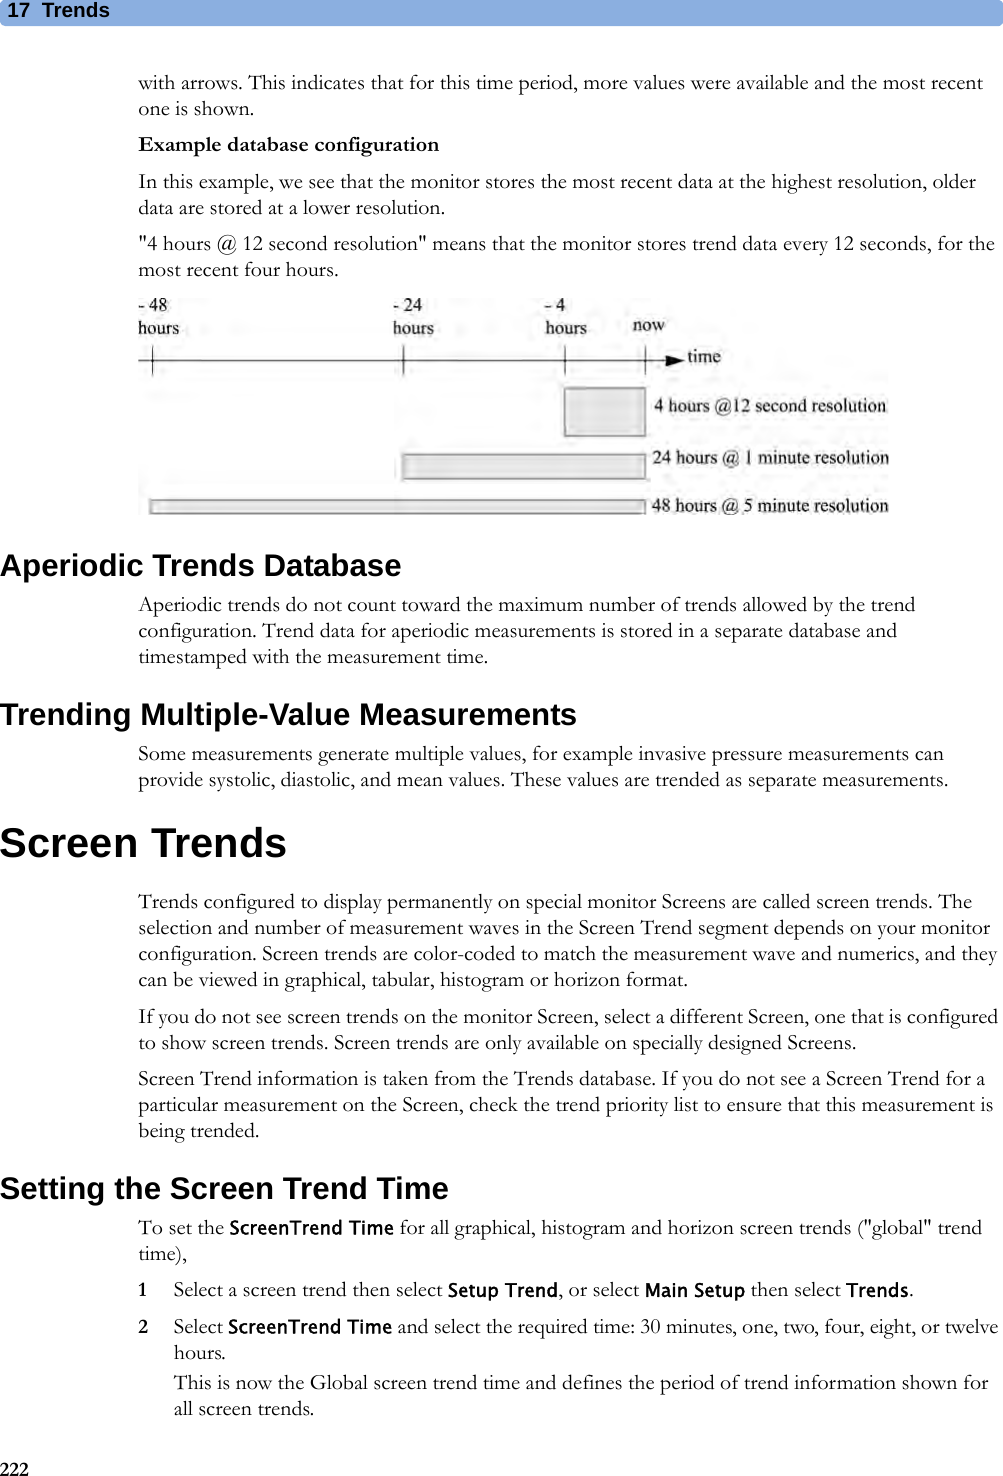 17 Trends222with arrows. This indicates that for this time period, more values were available and the most recent one is shown.Example database configurationIn this example, we see that the monitor stores the most recent data at the highest resolution, older data are stored at a lower resolution.&quot;4 hours @ 12 second resolution&quot; means that the monitor stores trend data every 12 seconds, for the most recent four hours.Aperiodic Trends DatabaseAperiodic trends do not count toward the maximum number of trends allowed by the trend configuration. Trend data for aperiodic measurements is stored in a separate database and timestamped with the measurement time.Trending Multiple-Value MeasurementsSome measurements generate multiple values, for example invasive pressure measurements can provide systolic, diastolic, and mean values. These values are trended as separate measurements.Screen TrendsTrends configured to display permanently on special monitor Screens are called screen trends. The selection and number of measurement waves in the Screen Trend segment depends on your monitor configuration. Screen trends are color-coded to match the measurement wave and numerics, and they can be viewed in graphical, tabular, histogram or horizon format.If you do not see screen trends on the monitor Screen, select a different Screen, one that is configured to show screen trends. Screen trends are only available on specially designed Screens.Screen Trend information is taken from the Trends database. If you do not see a Screen Trend for a particular measurement on the Screen, check the trend priority list to ensure that this measurement is being trended.Setting the Screen Trend TimeTo set the ScreenTrend Time for all graphical, histogram and horizon screen trends (&quot;global&quot; trend time),1Select a screen trend then select Setup Trend, or select Main Setup then select Trends.2Select ScreenTrend Time and select the required time: 30 minutes, one, two, four, eight, or twelve hours.This is now the Global screen trend time and defines the period of trend information shown for all screen trends.